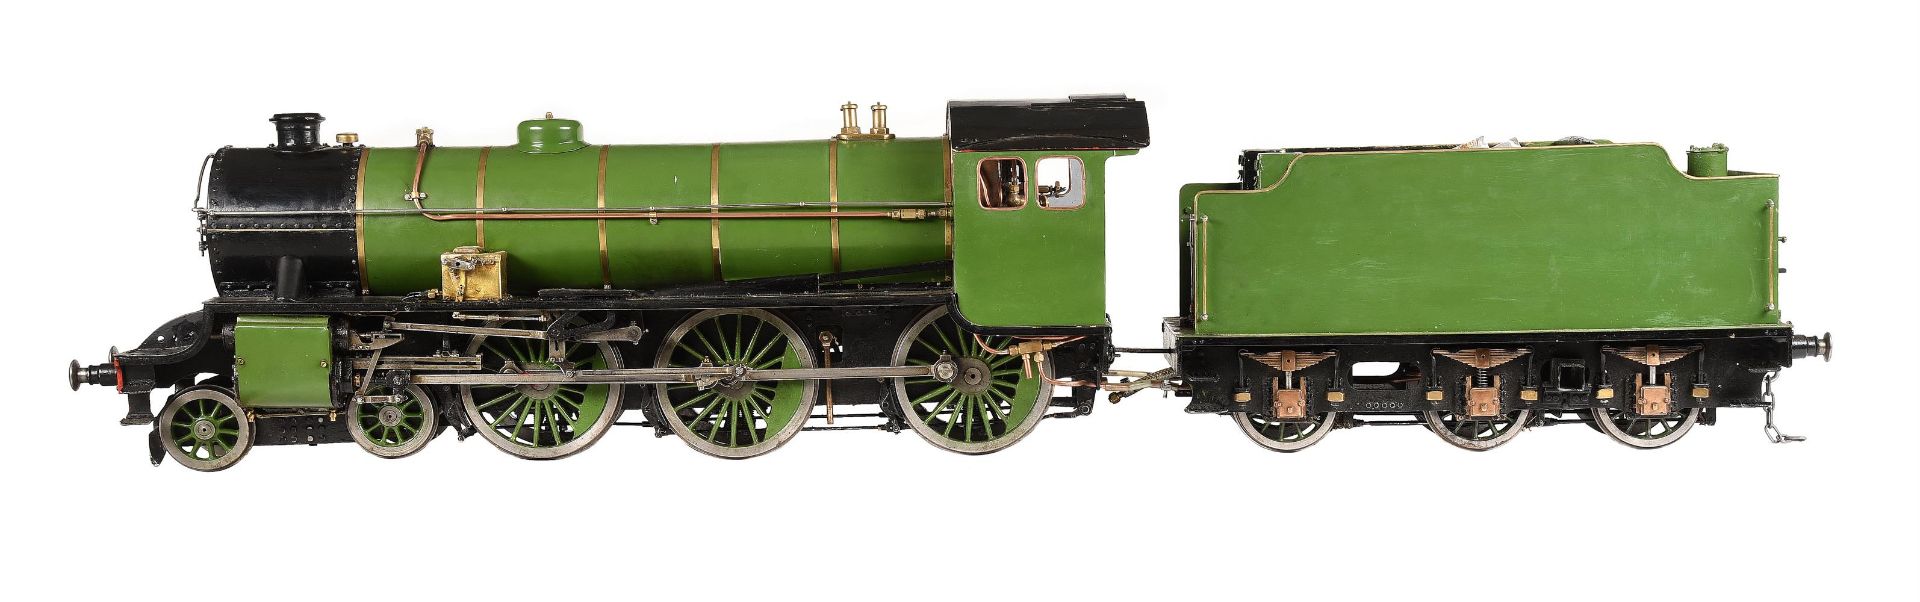 A well-engineered 5 inch gauge model of a Thompson Class B1 4-6-0 tender locomotive - Image 2 of 4